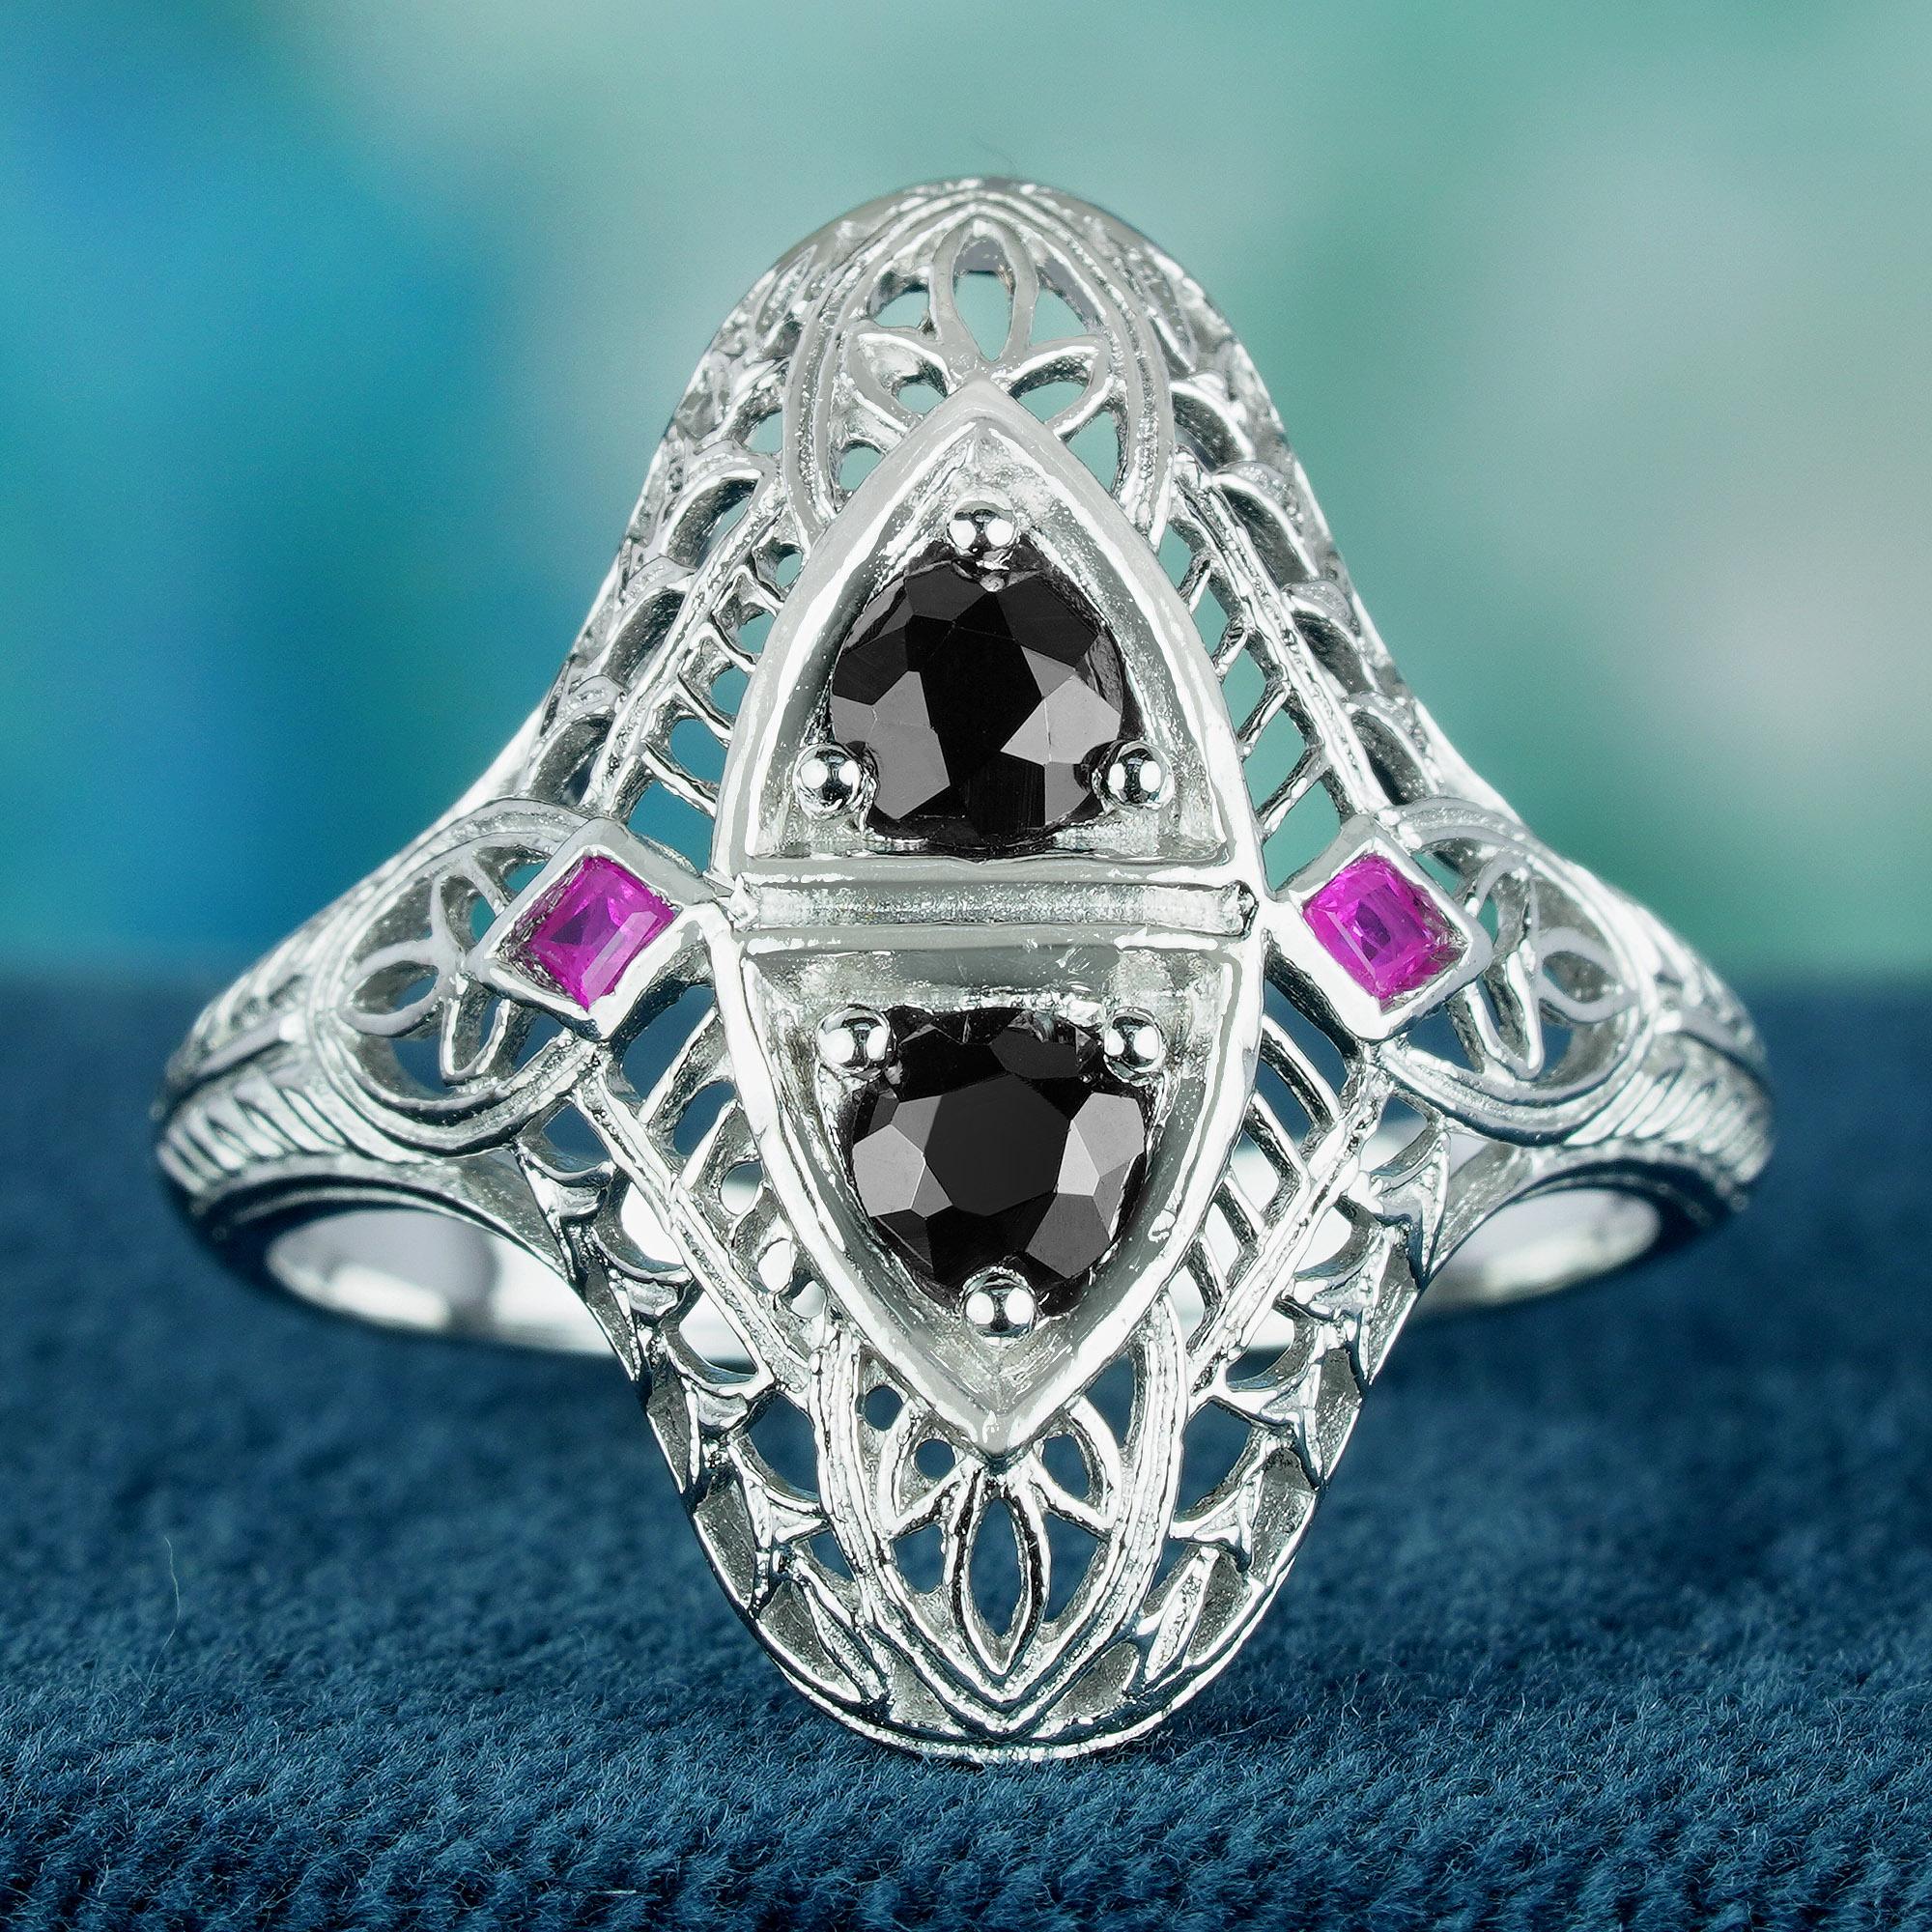 This exquisite ring showcases a vintage Art Deco design, featuring two round natural onyx gemstones gracefully cascading at its centerpiece in a bead setting. Flanking these onyx stones are smaller pink ruby gemstones, each carefully placed on the